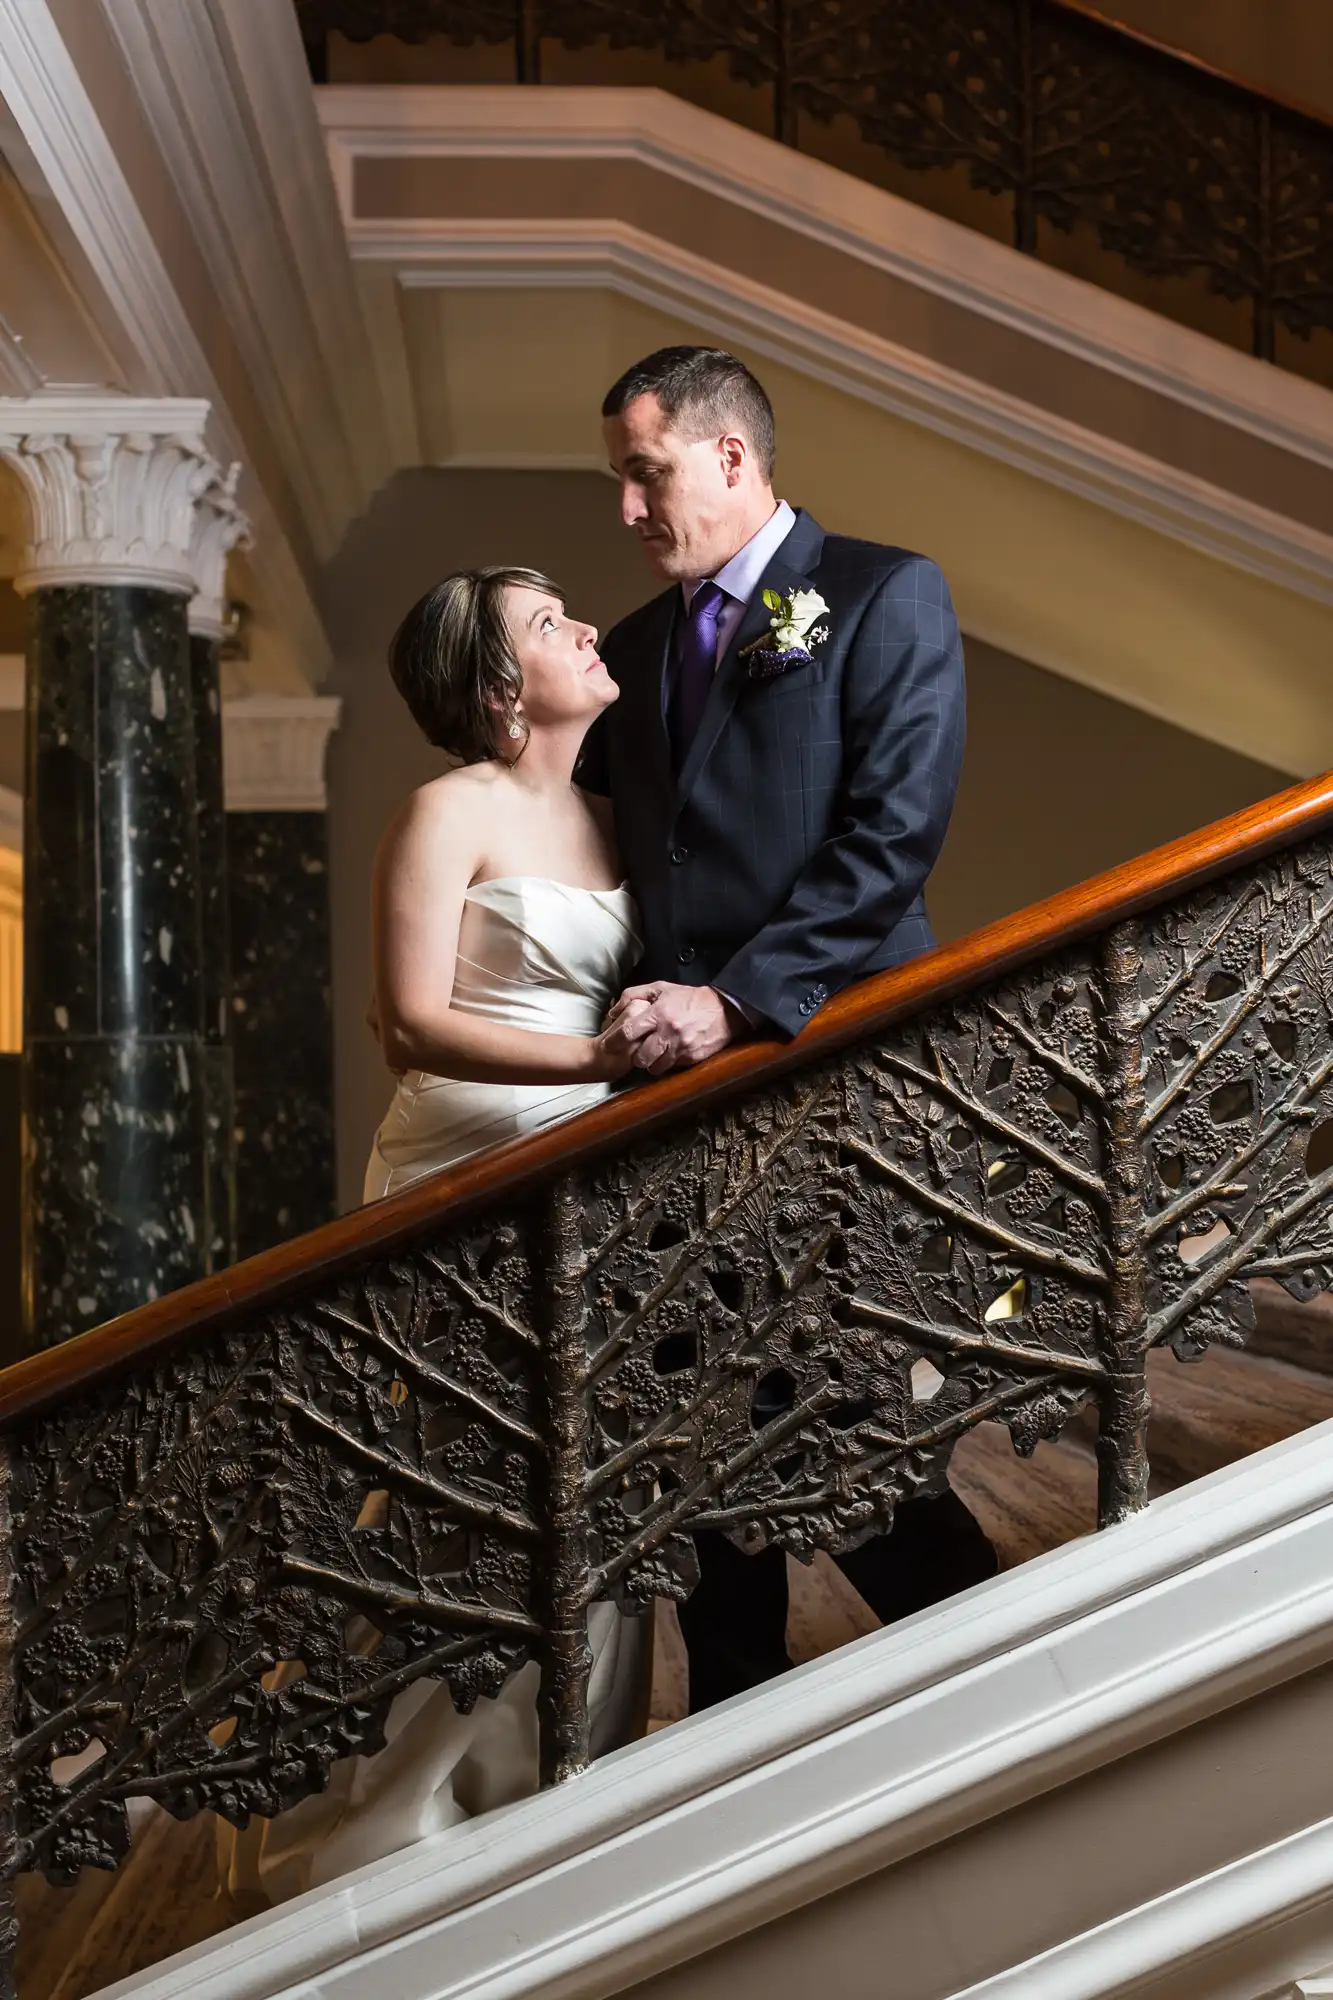 A couple in wedding attire affectionately gaze at each other while standing on an ornate staircase with intricate railings.